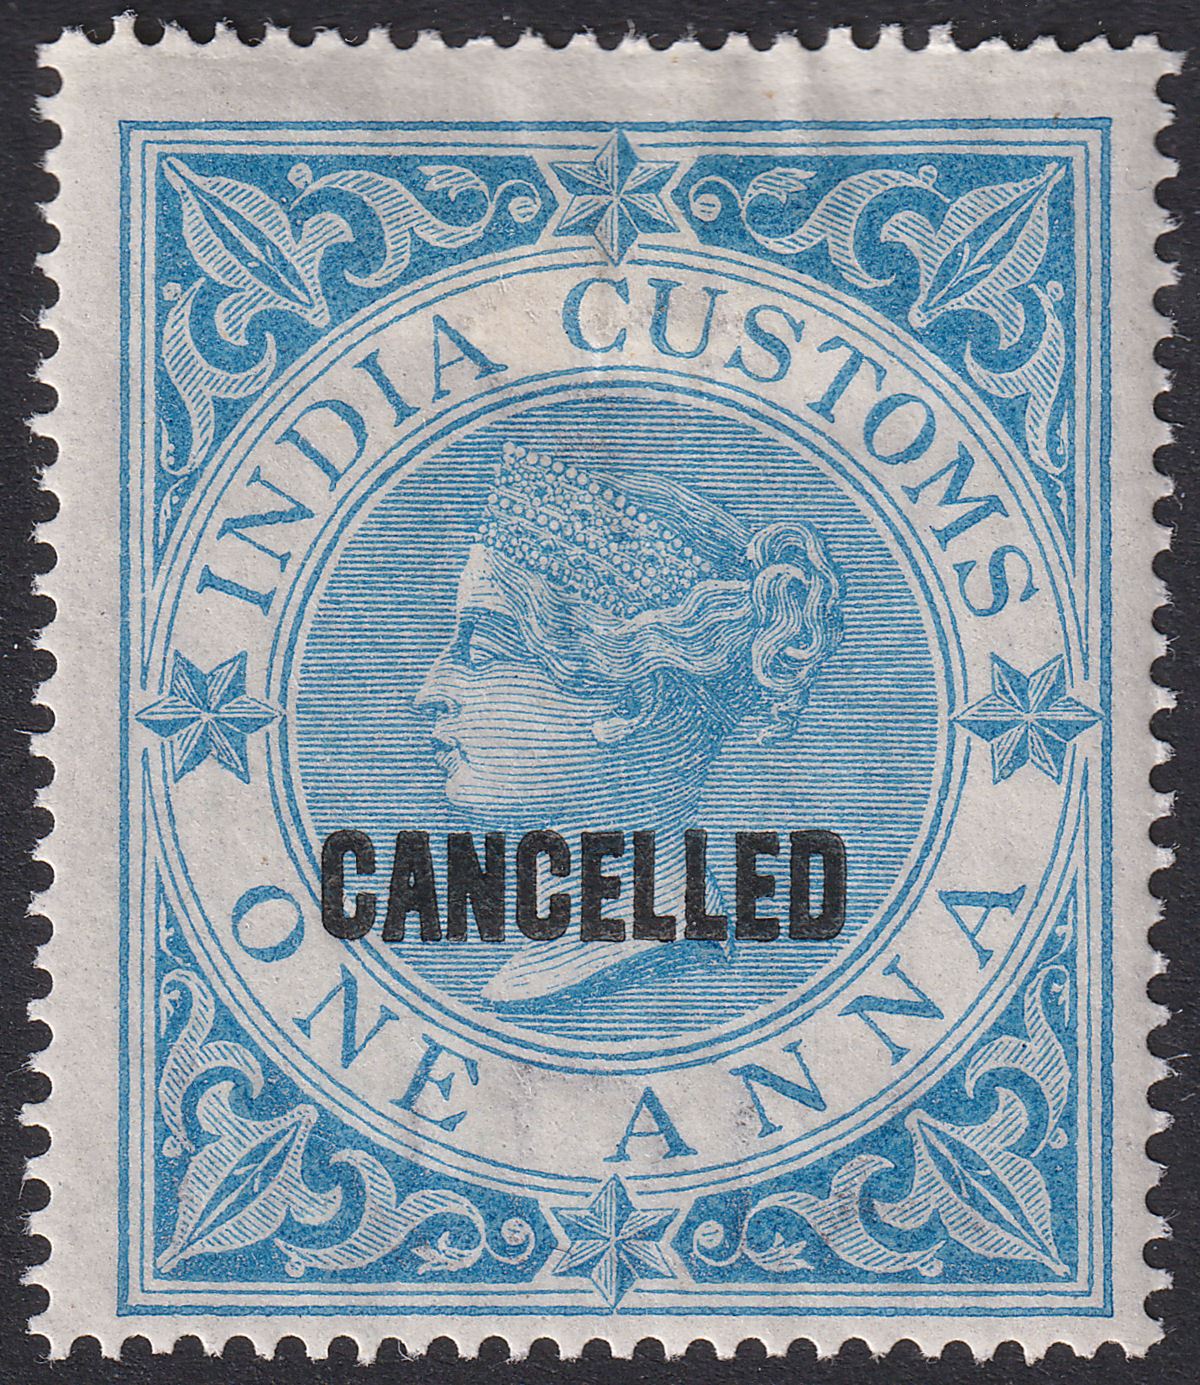 India 1865 Queen Victoria Revenue Customs Type 16 CANCELLED 1a Blue Mint BF1c